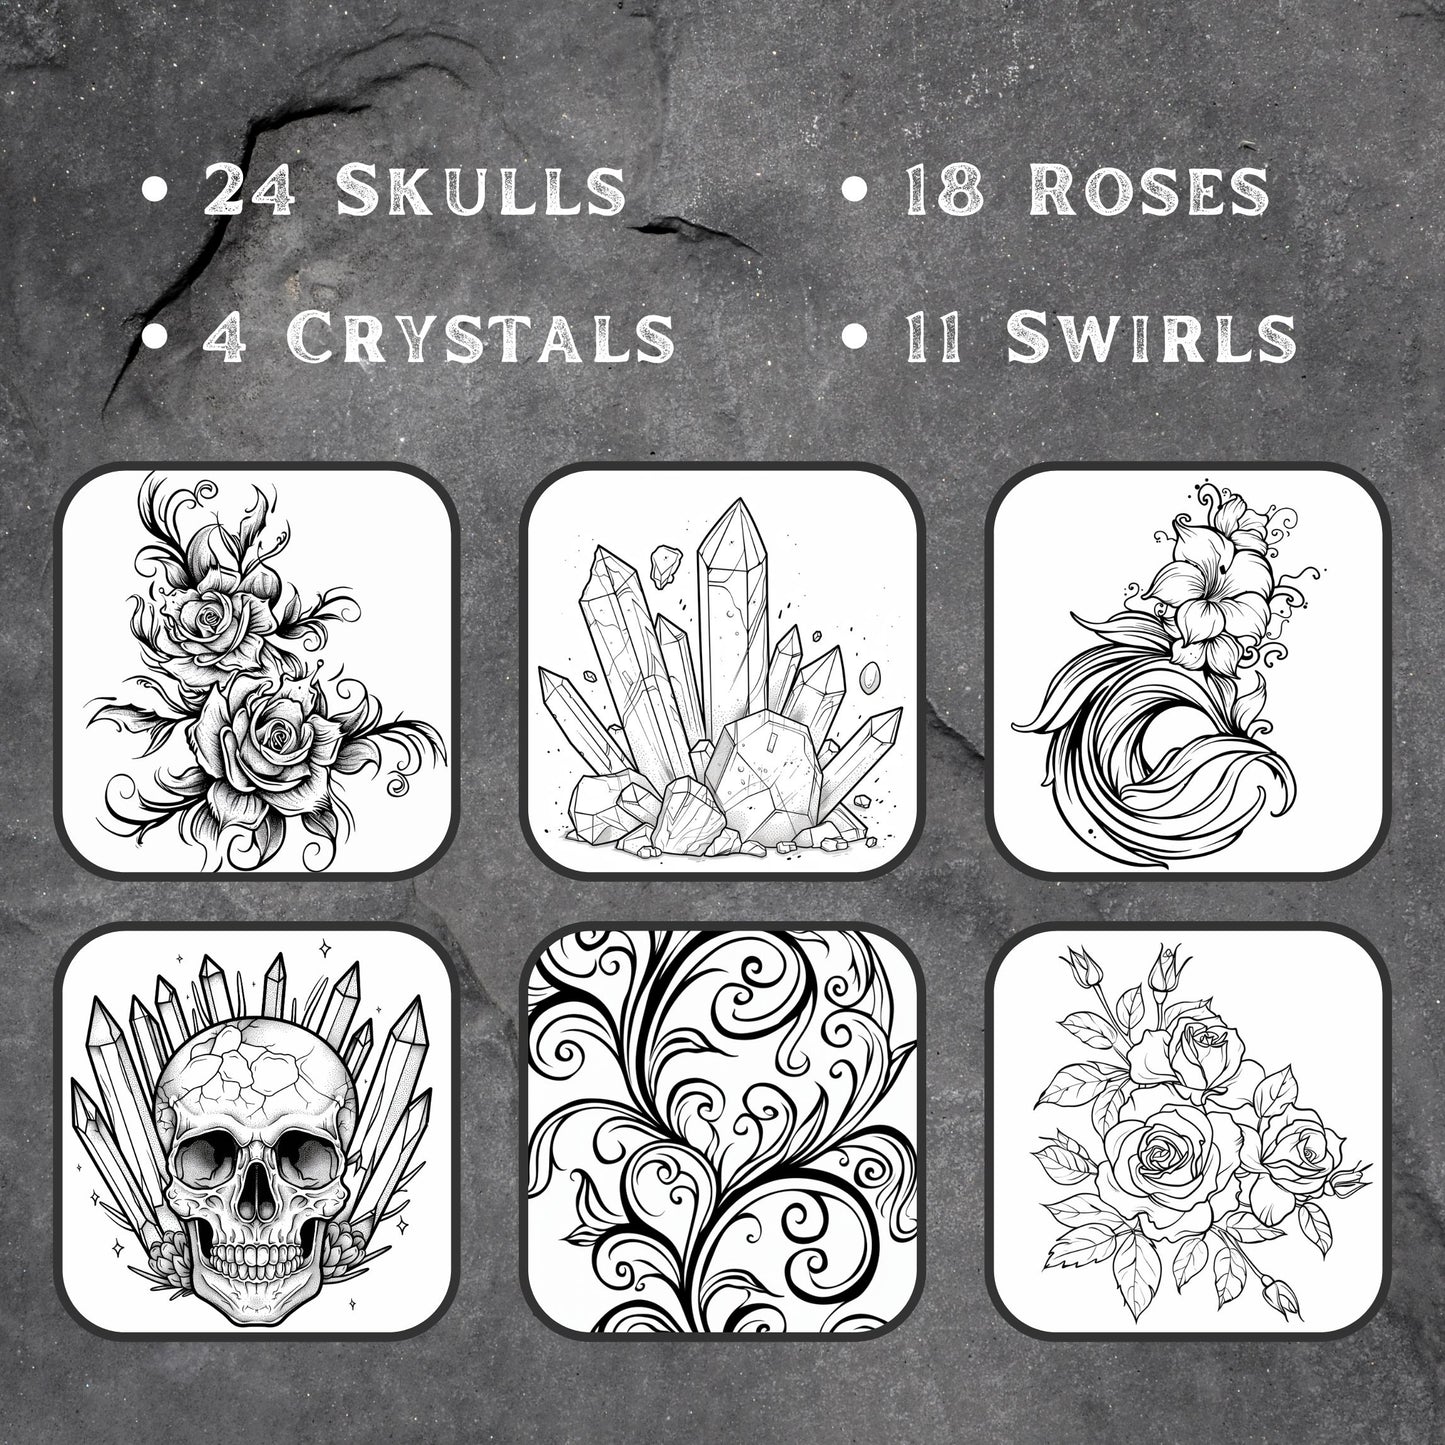 Skulls and Roses Stamp Brush Pack for Photoshop and Procreate - Digital Download